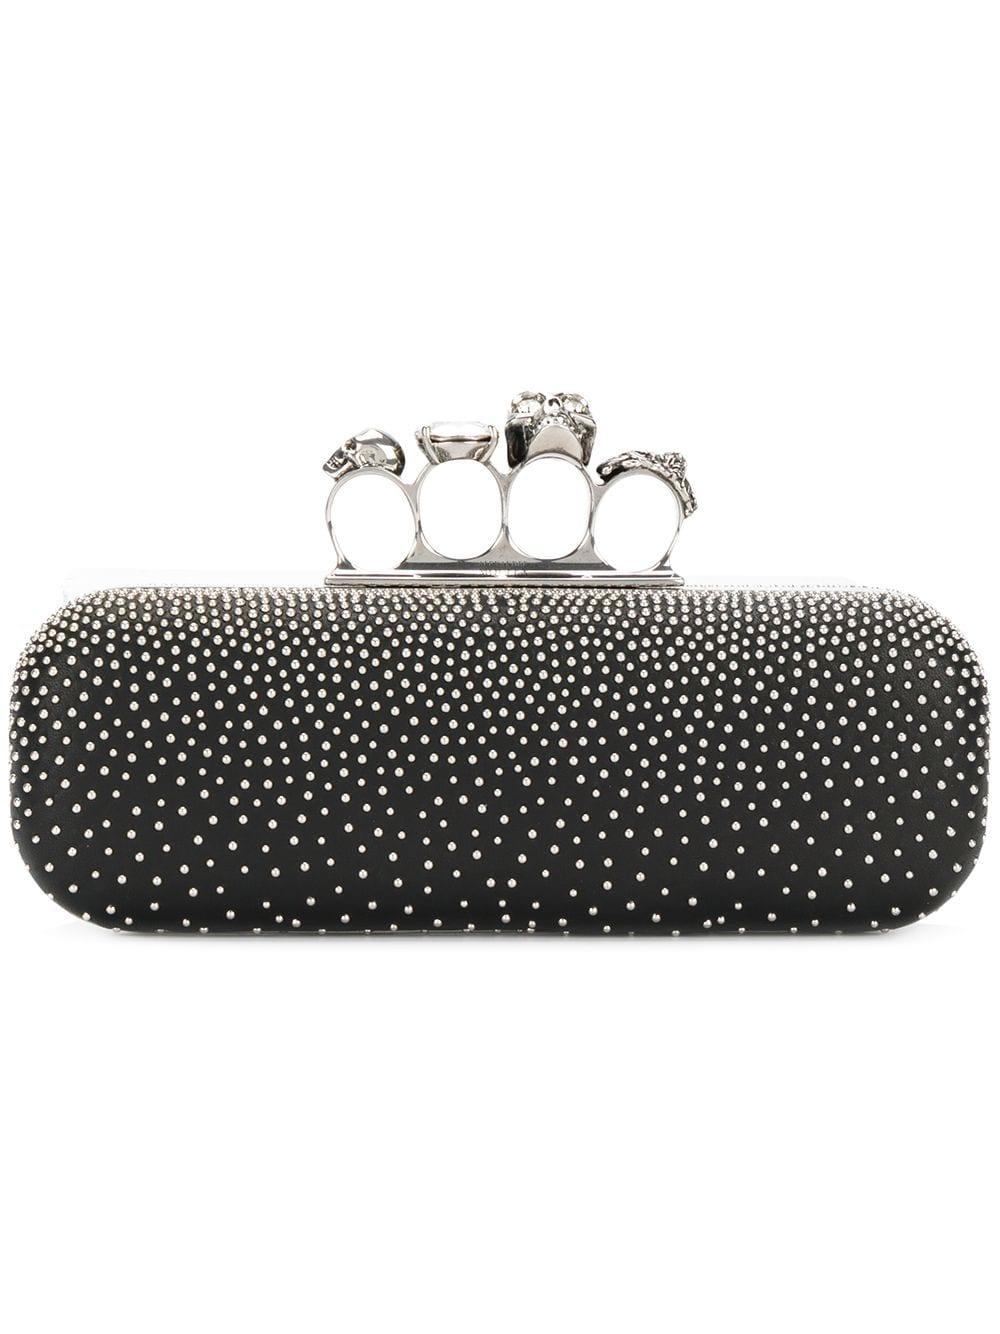 Alexander McQueen Leather Studded Fourring Clutch Bag in Black Lyst